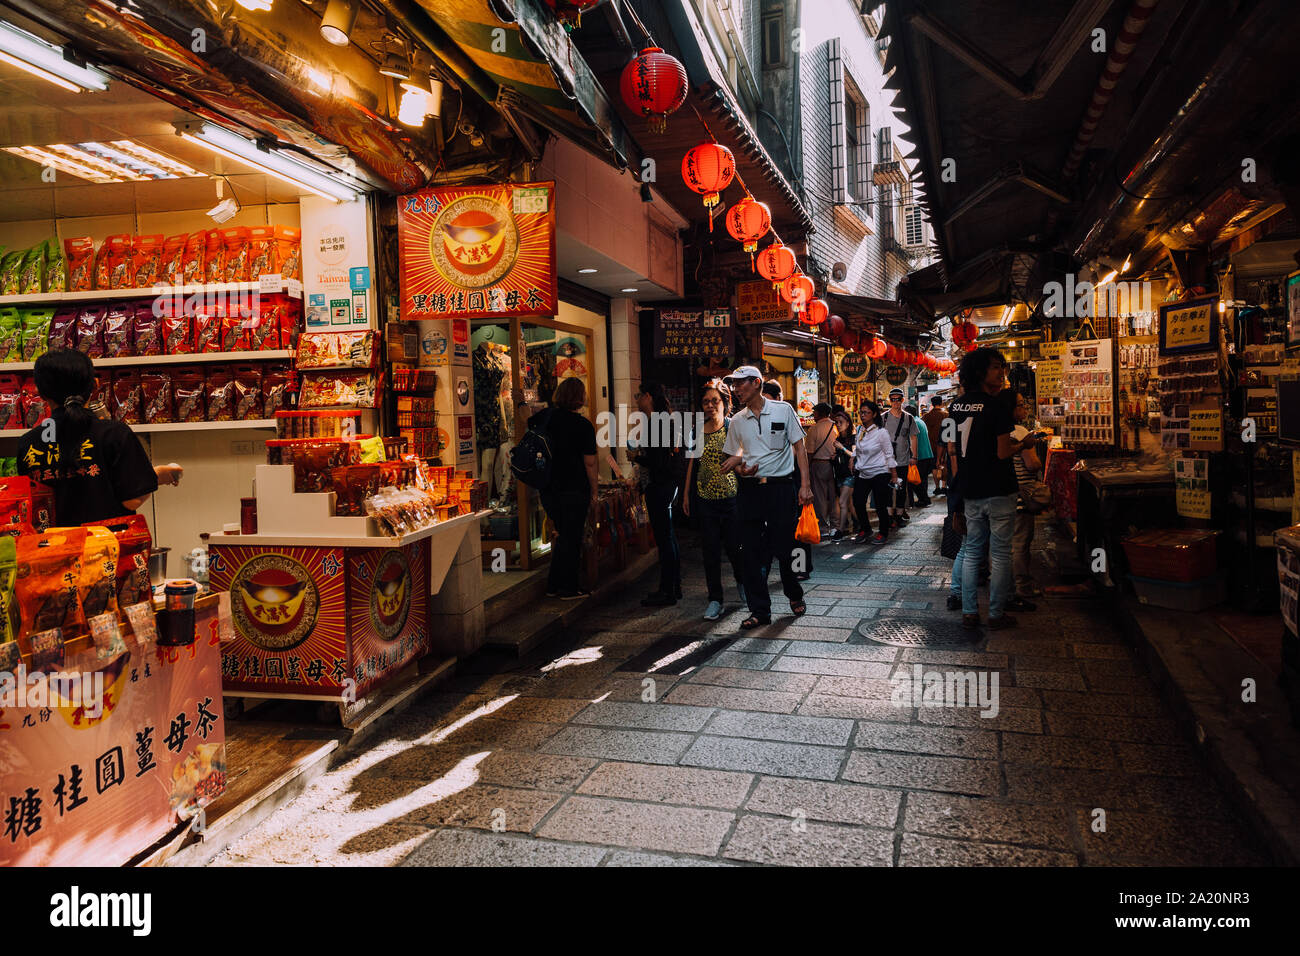 Jiufen, Taiwan - November 07, 2018: People walk with purchases along the Old Street market on November 7, 2018, in Jiufen, Taiwan Stock Photo